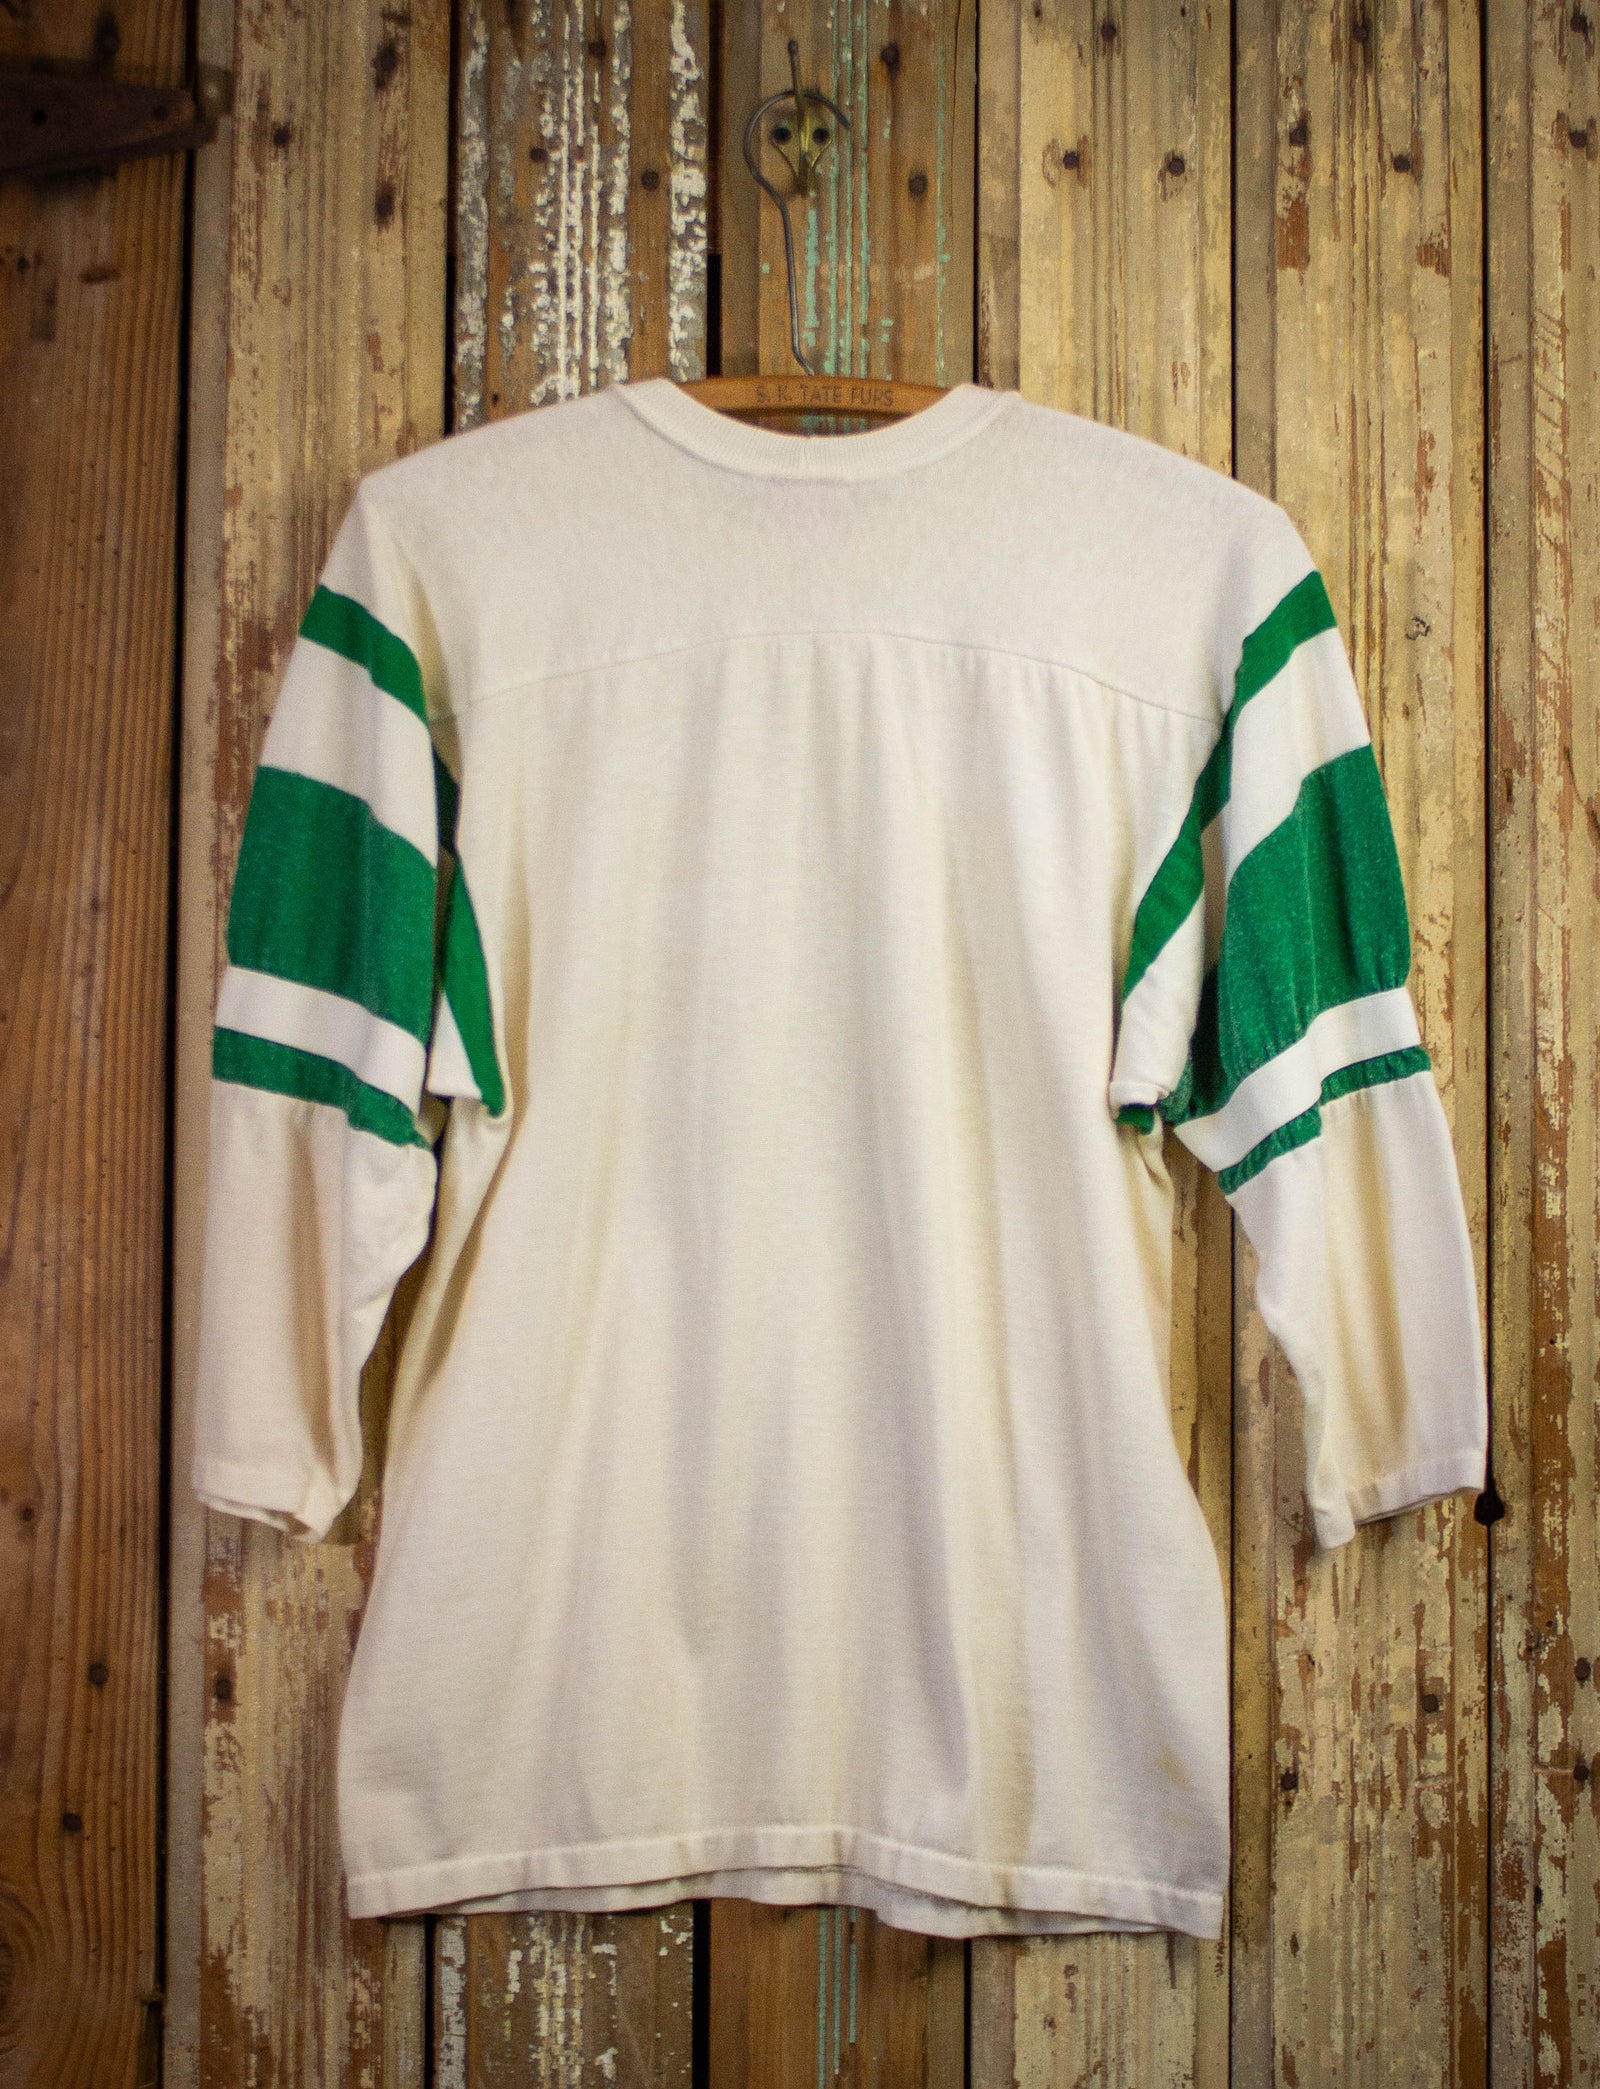 Vintage Blank White Long Sleeve T Shirt with Green Striped Sleeves 70s Medium